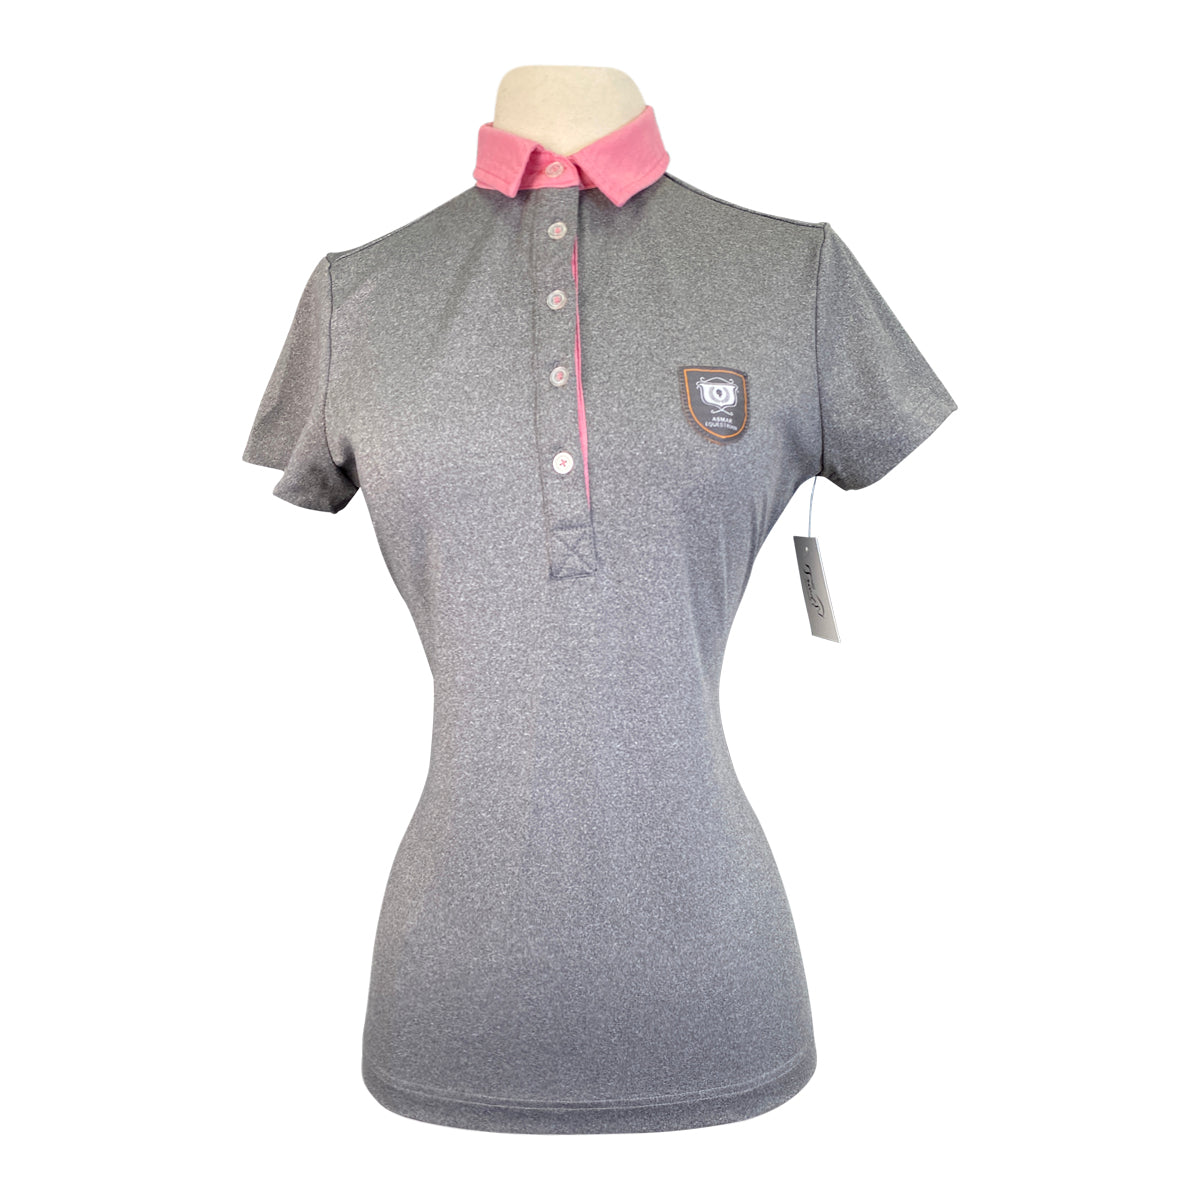 Asmar Equestrian 1/4 Button-Up Short Sleeve Polo in Grey/Pink